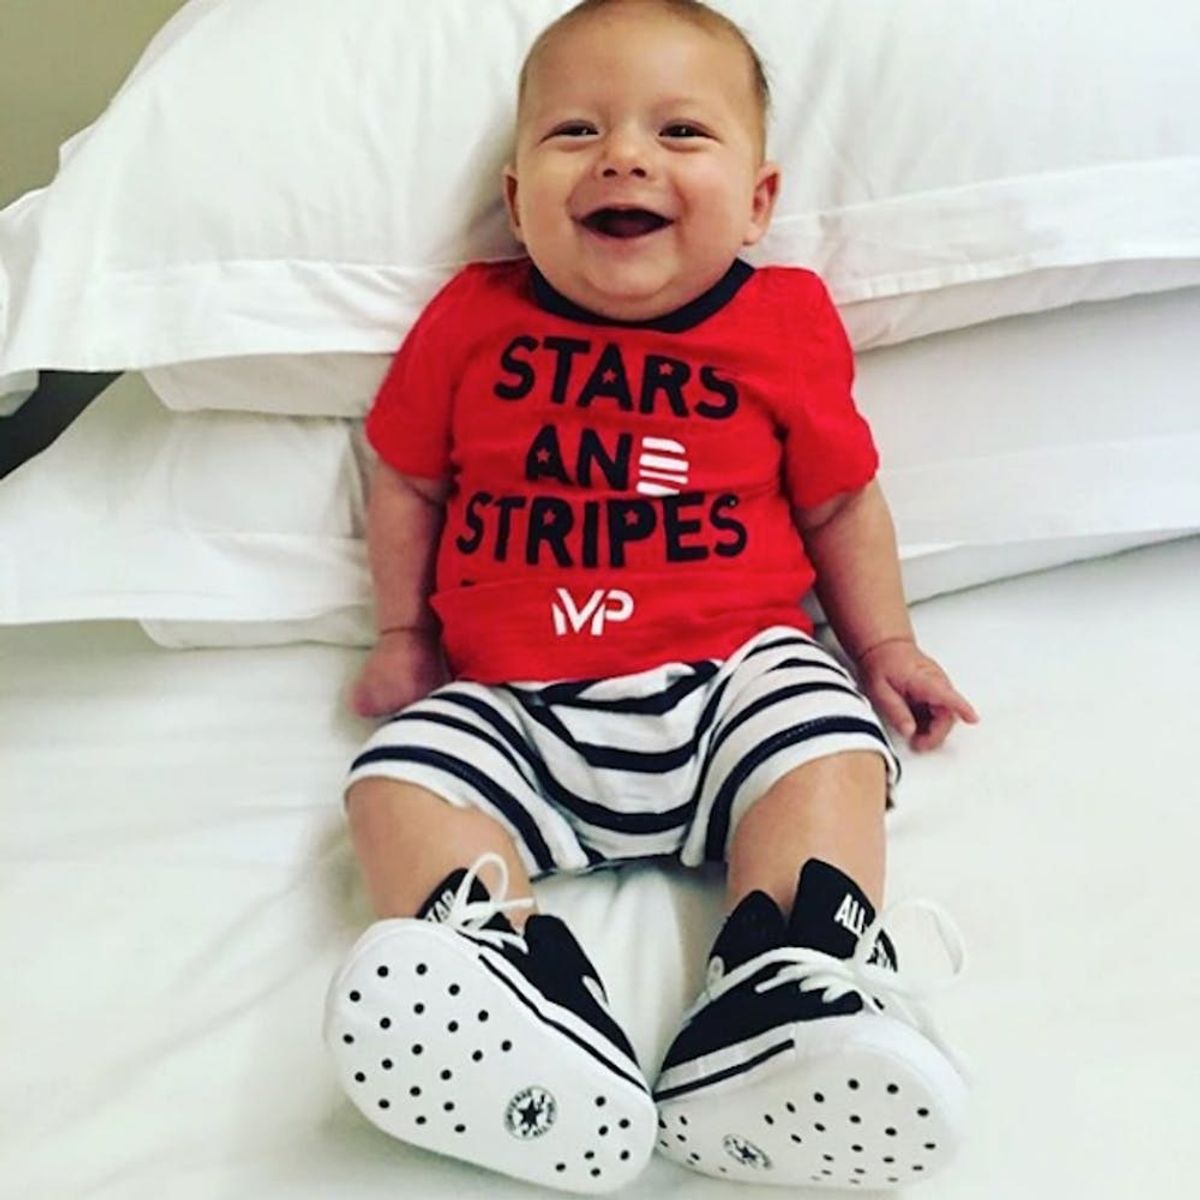 11 Times Celeb Babies Gave Us Something to Smile About in 2016